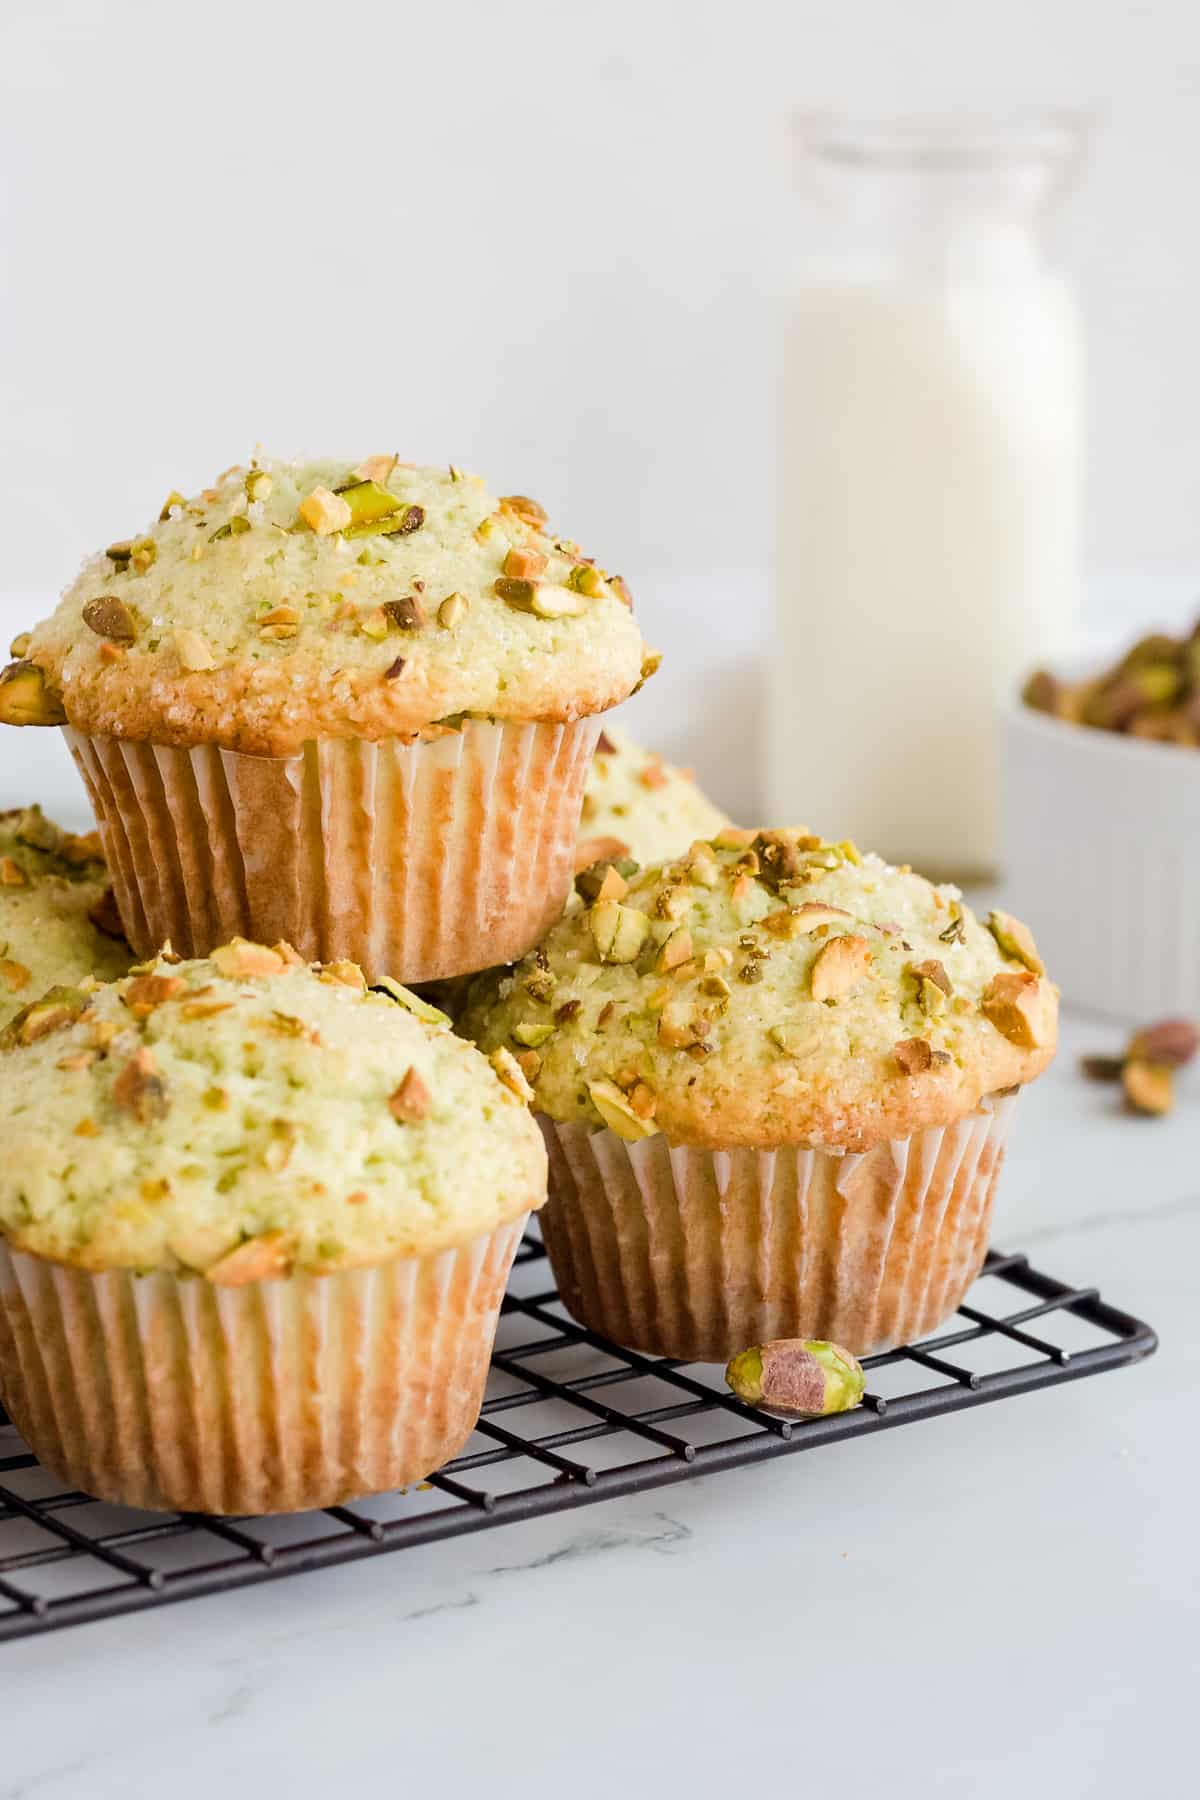 Pistachio muffins stacked on wire rack with a glass of milk and a bowl of pistachios in background